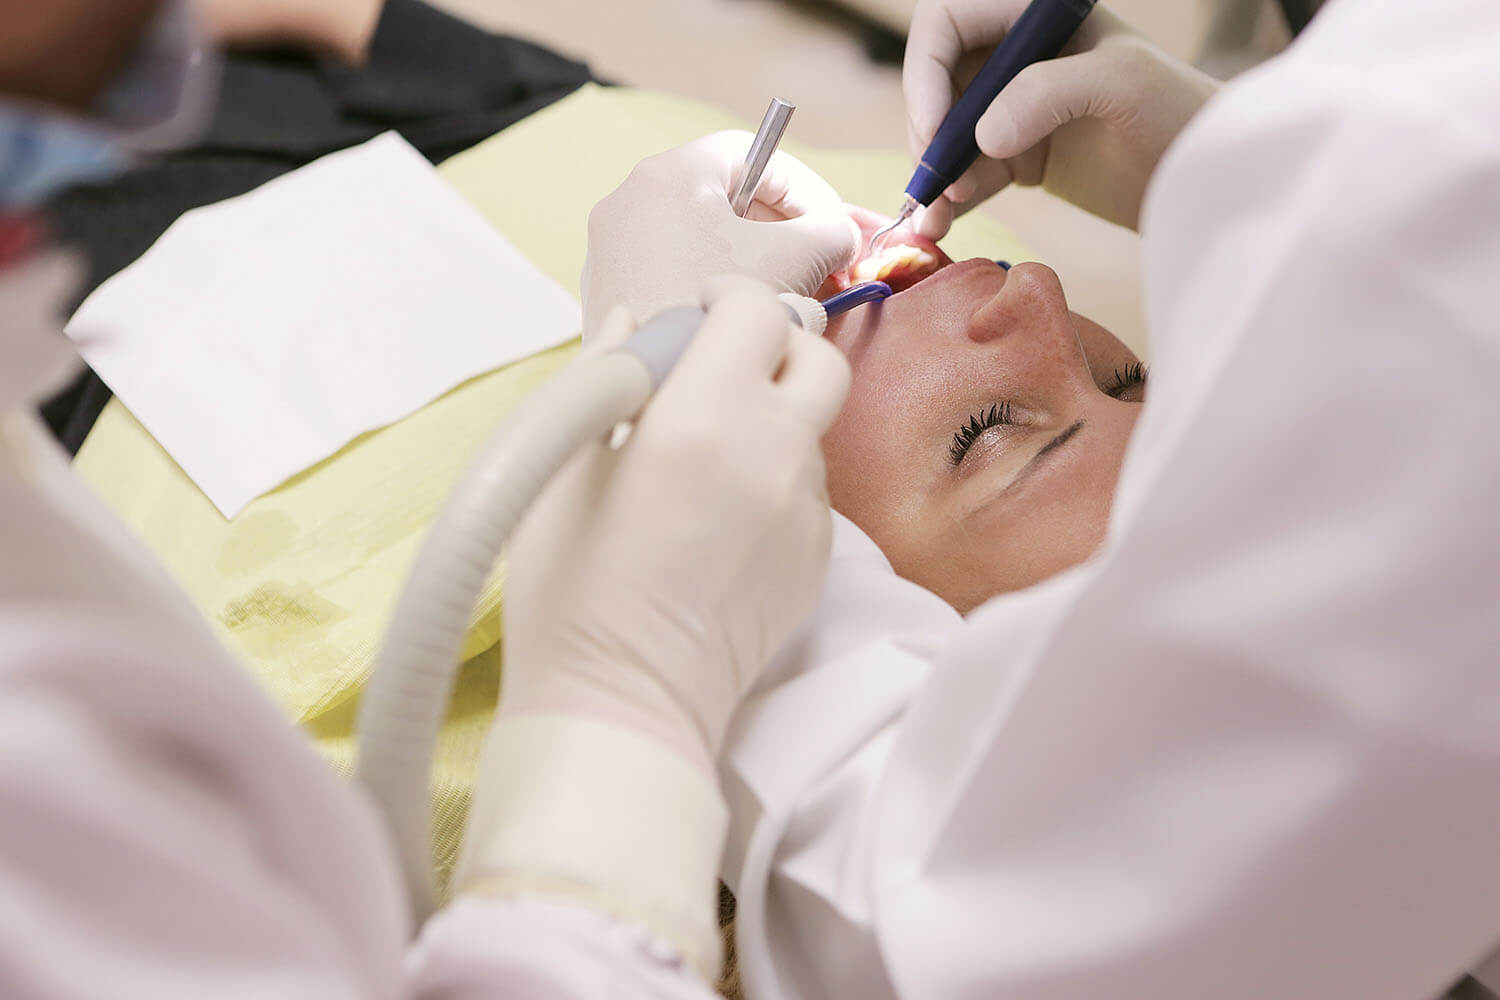 Two dentists attending to a patient